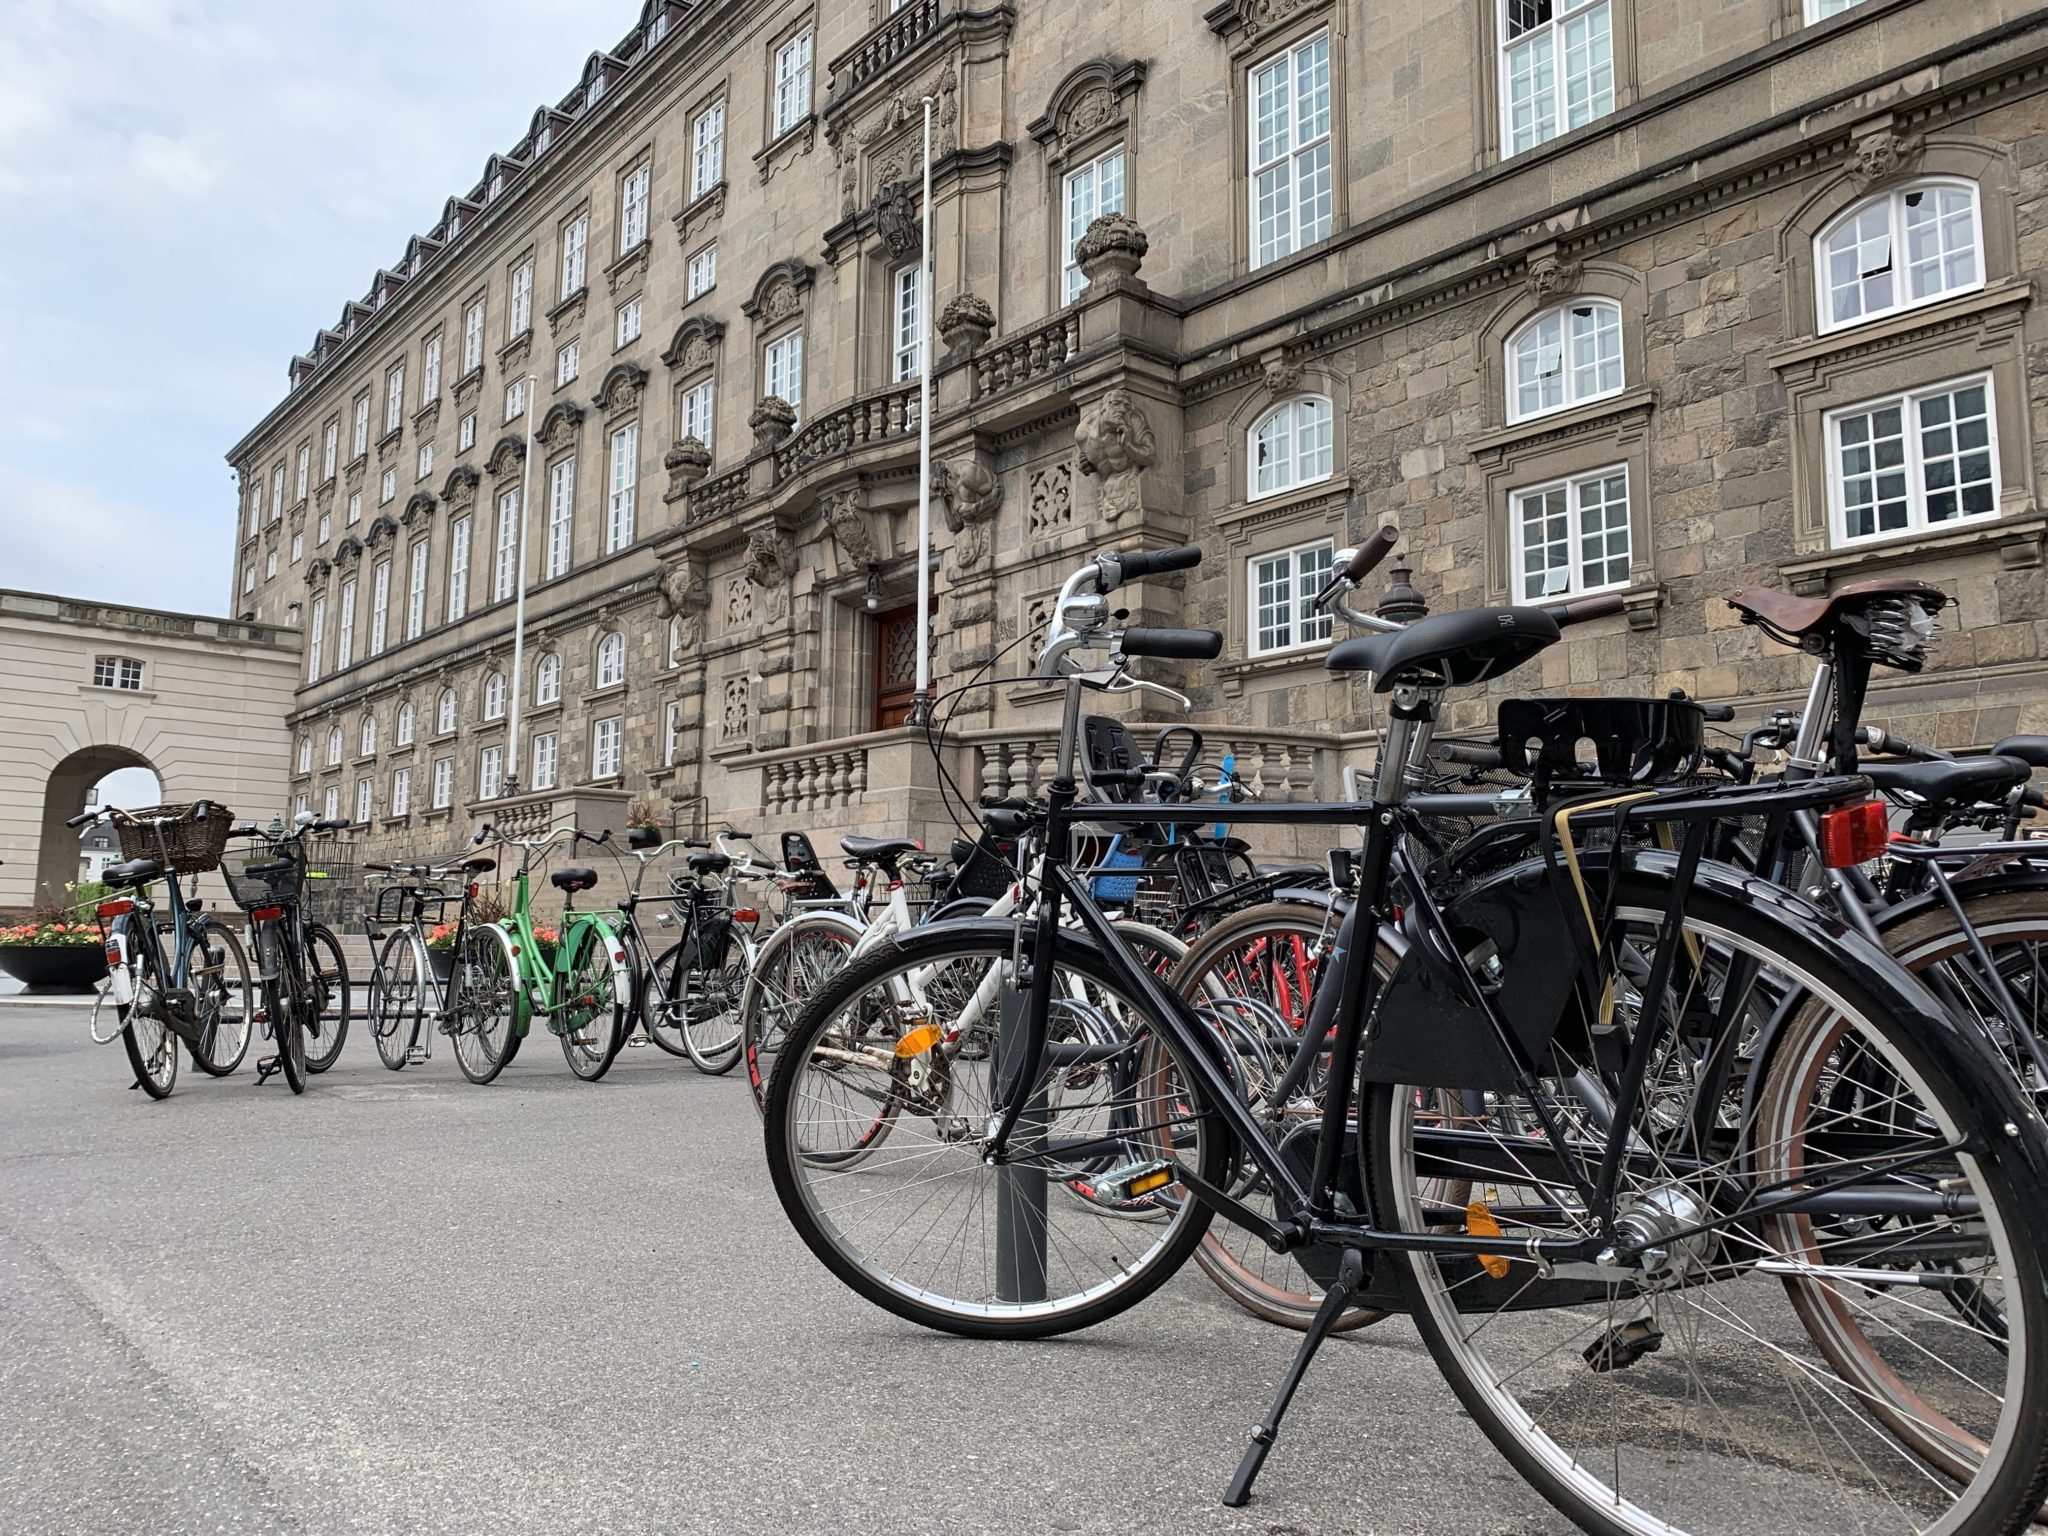 Many bikes parked to bike racks in front of a building in Copenhagen.